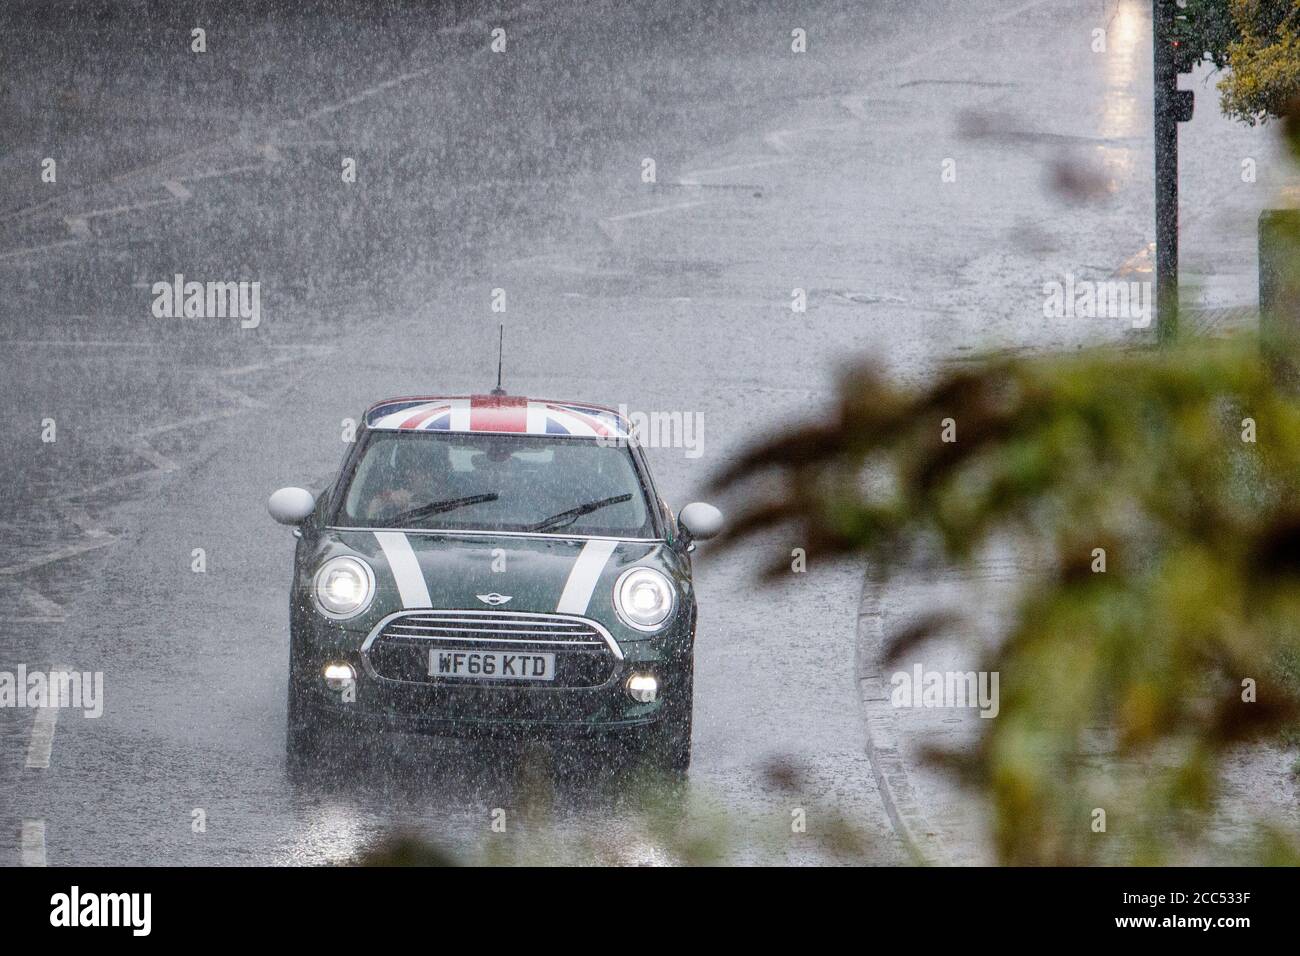 Chippenham, Wiltshire, UK. 18th August, 2020. As forecasters warn that thunder storms will affect many parts of the UK, drivers are pictured braving heavy rain in Chippenham. Credit: Lynchpics/Alamy Live News Stock Photo